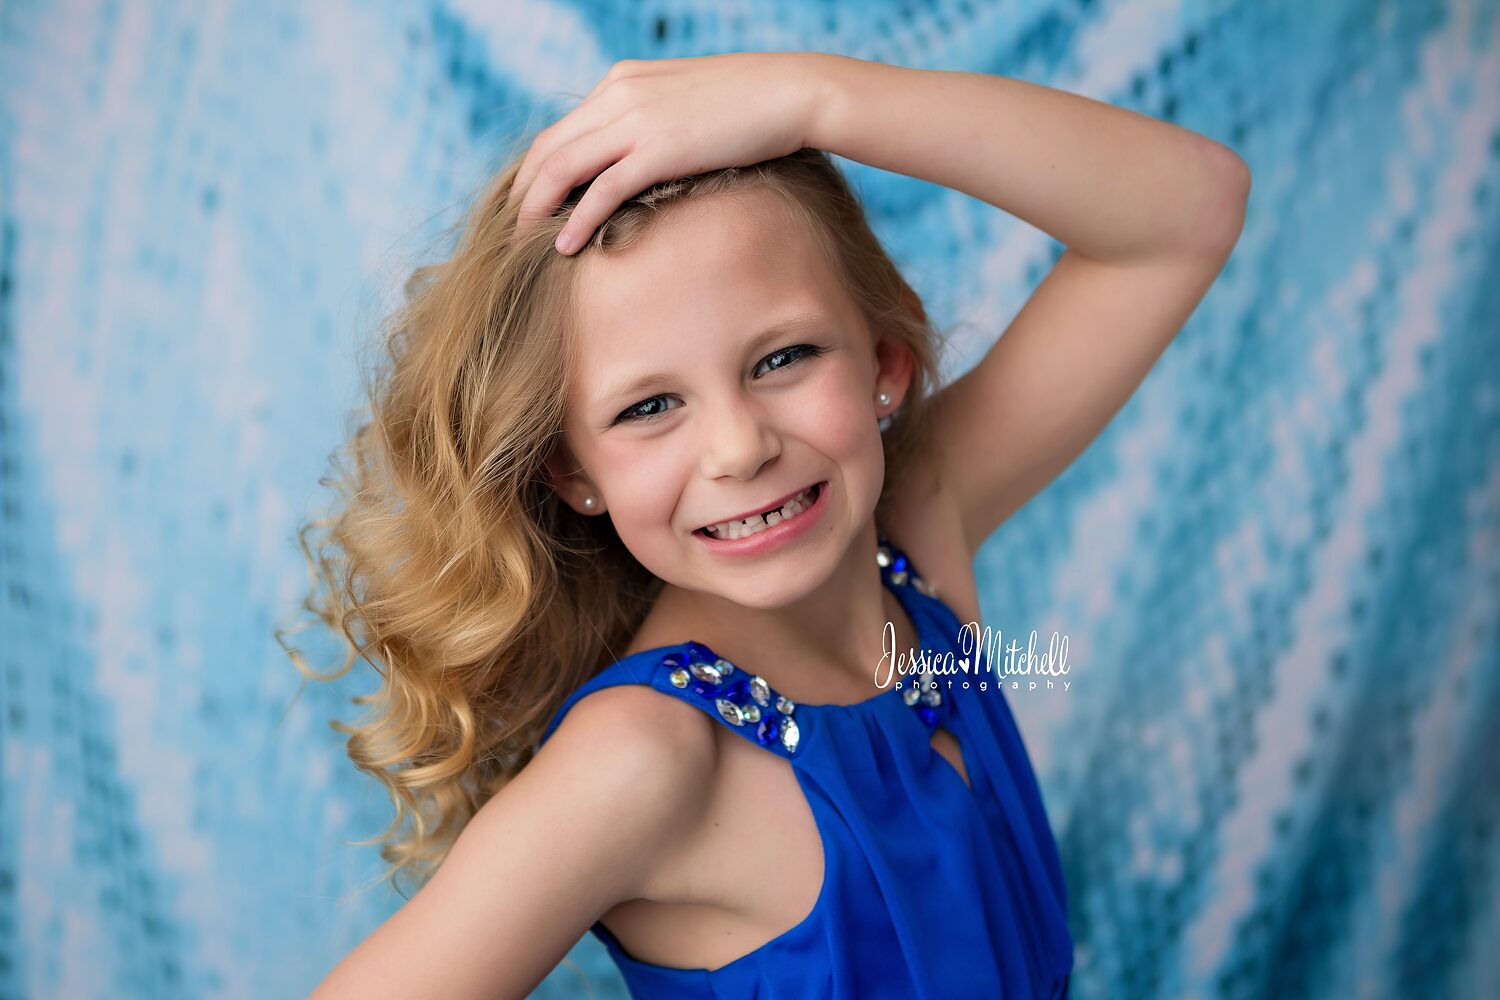 Addyson Mitchell posing for Head shots for Beauty Pageant.